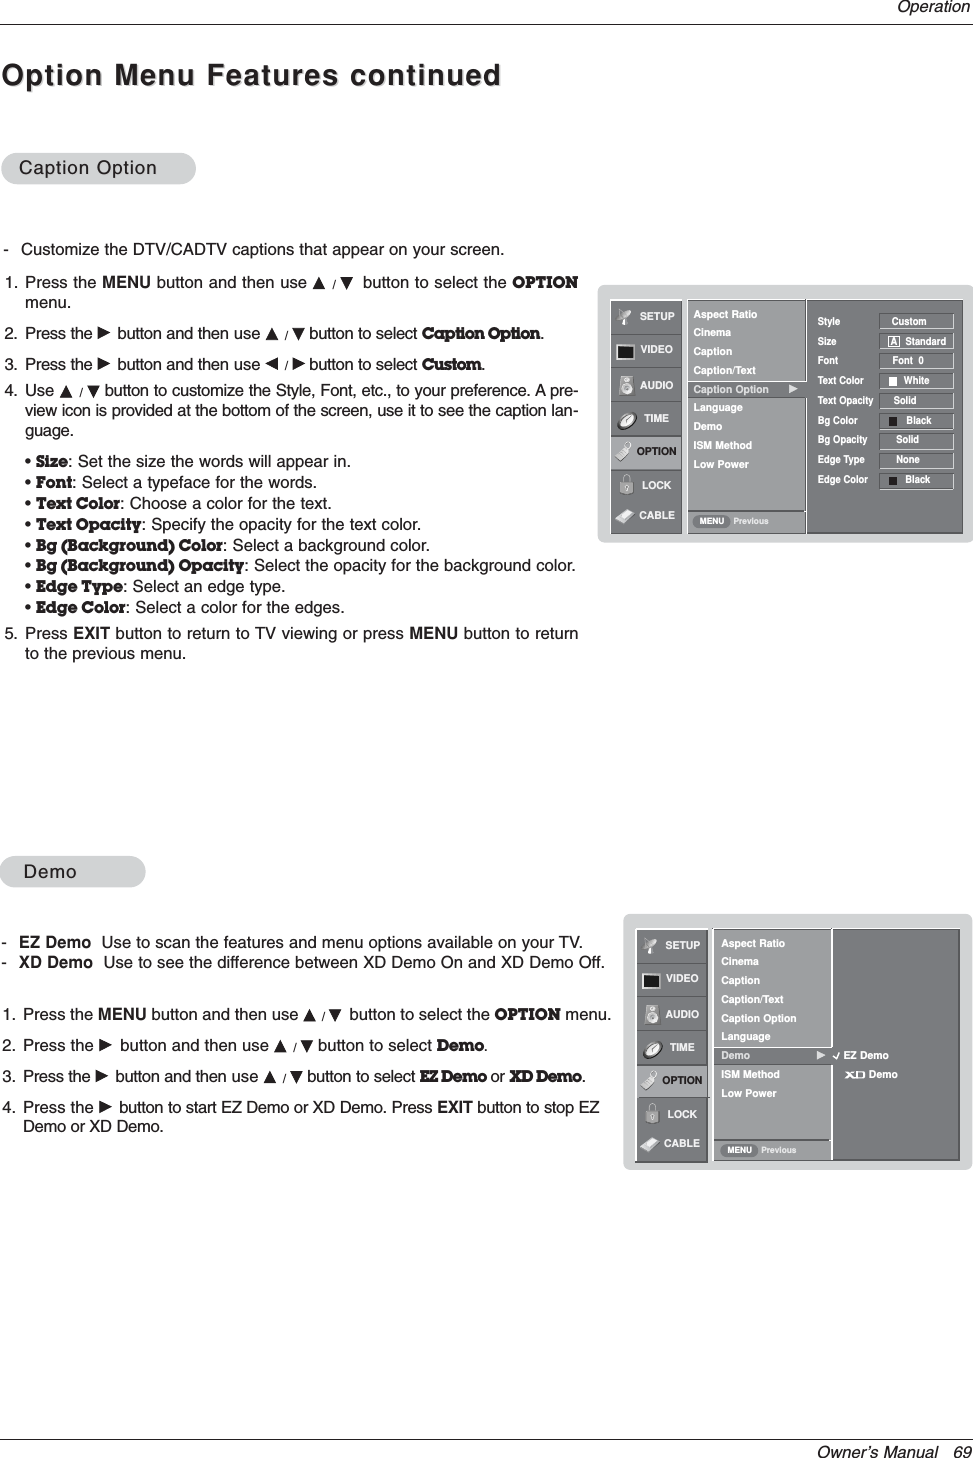 Owner’s Manual   69OperationOption Menu Features continuedOption Menu Features continuedSETUPVIDEOAUDIOTIMEOPTIONLOCKPreviousAspect RatioCinemaCaptionCaption/TextCaption Option GLanguageDemoISM MethodLow PowerStyle                  CustomSize                   A StandardFont                   Font  0Text Color              WhiteText Opacity       Solid Bg Color                 BlackBg Opacity          SolidEdge Type           NoneEdge Color             BlackMENUCaption OptionCaption Option- Customize the DTV/CADTV captions that appear on your screen.1. Press the MENU button and then use D/Ebutton to select the OPTIONmenu.2. Press the Gbutton and then use D/Ebutton to select Caption Option.3. Press the Gbutton and then use F/Gbutton to select Custom.4. Use D/Ebutton to customize the Style, Font, etc., to your preference. A pre-view icon is provided at the bottom of the screen, use it to see the caption lan-guage.•Size: Set the size the words will appear in.•Font: Select a typeface for the words.•Text Color: Choose a color for the text.•Text Opacity: Specify the opacity for the text color.•Bg (Background) Color: Select a background color.•Bg (Background) Opacity: Select the opacity for the background color.•Edge Type: Select an edge type.•Edge Color: Select a color for the edges.5. Press EXIT button to return to TV viewing or press MENU button to returnto the previous menu.SETUPVIDEOAUDIOTIMEOPTIONLOCKPreviousAspect RatioCinemaCaptionCaption/TextCaption OptionLanguageDemo GISM MethodLow PowerMENUDemoDemo-EZ Demo Use to scan the features and menu options available on your TV.-XD Demo Use to see the difference between XD Demo On and XD Demo Off.1. Press the MENU button and then use D/Ebutton to select the OPTION menu.2. Press the Gbutton and then use D/Ebutton to select Demo.3. Press the Gbutton and then use D/Ebutton to select EZ Demo or XD Demo.4. Press the Gbutton to start EZ Demo or XD Demo. Press EXIT button to stop EZDemo or XD Demo.EZ DemoDemoCABLECABLE